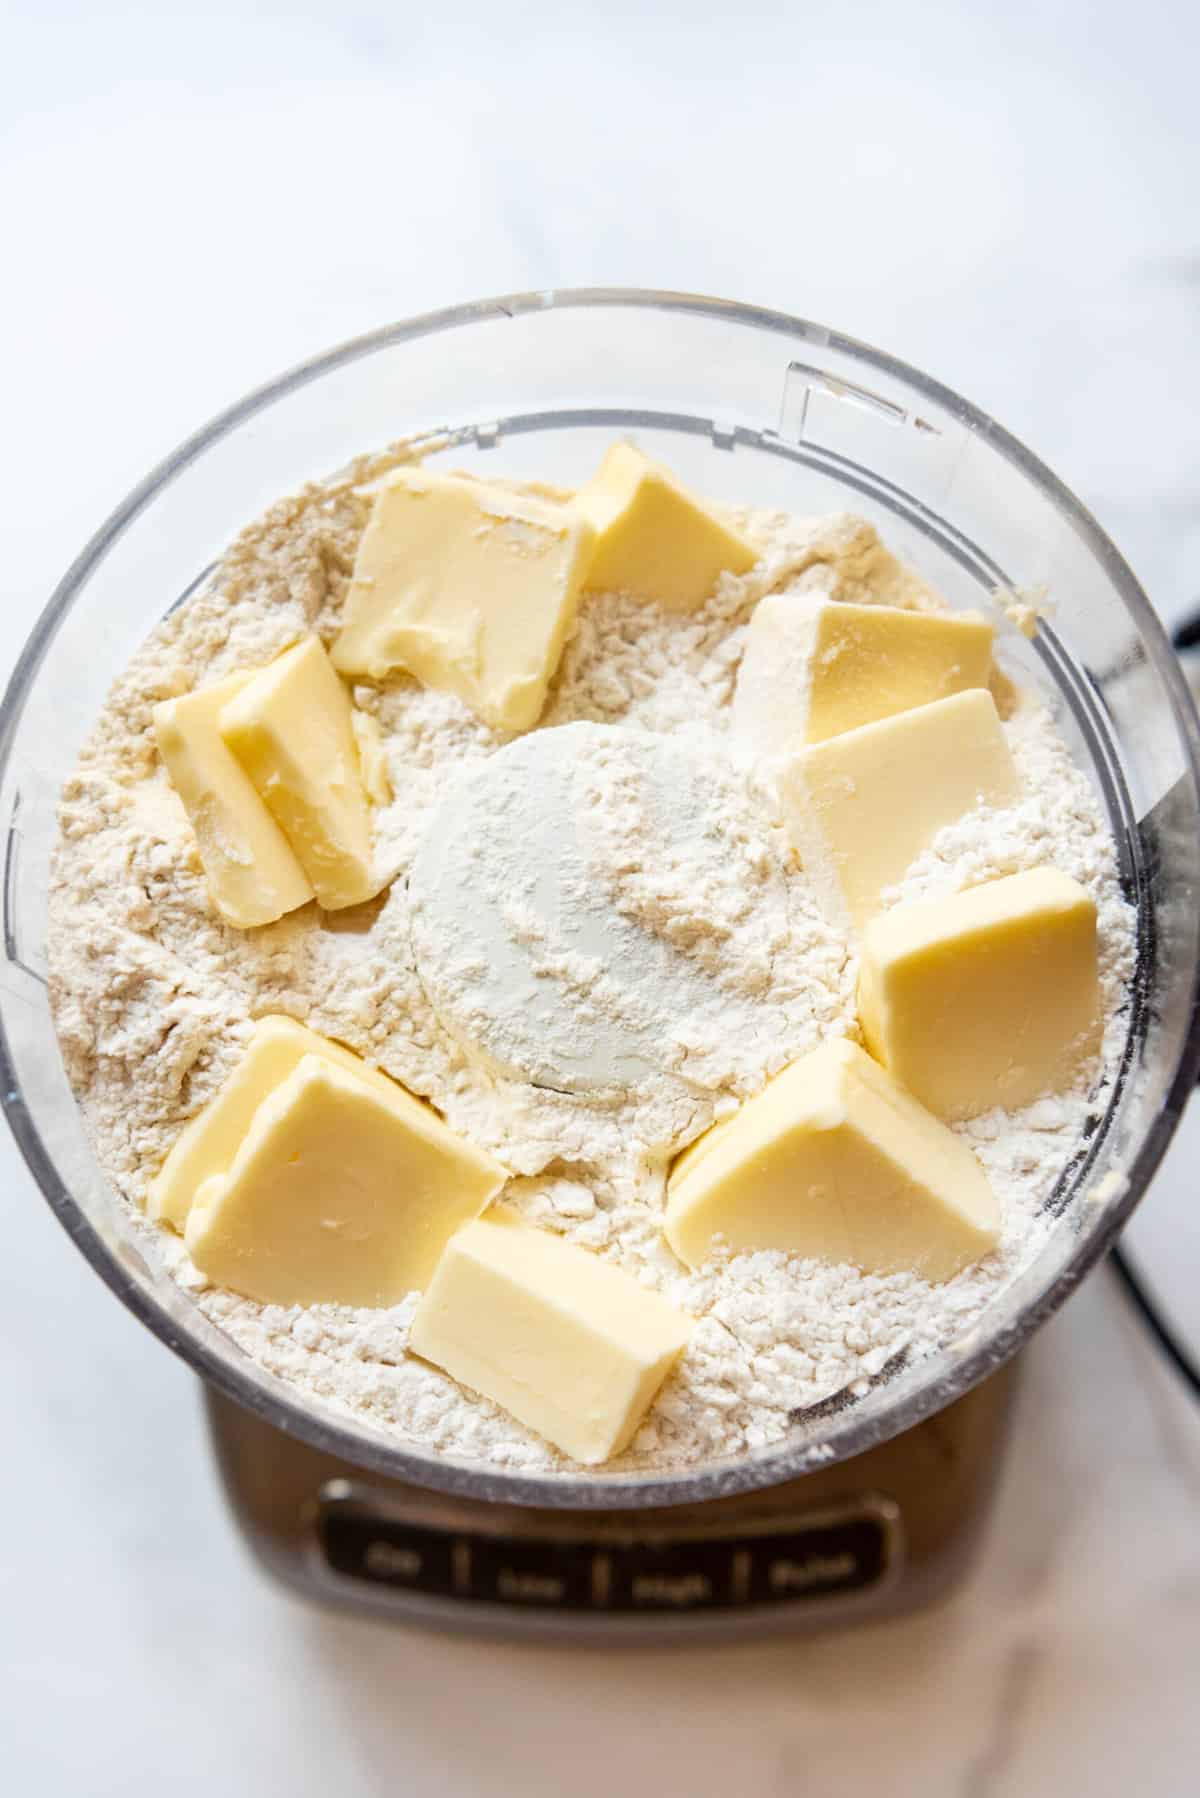 Pulsing butter and flour in a food  processor until it resembles coarse crumbs.